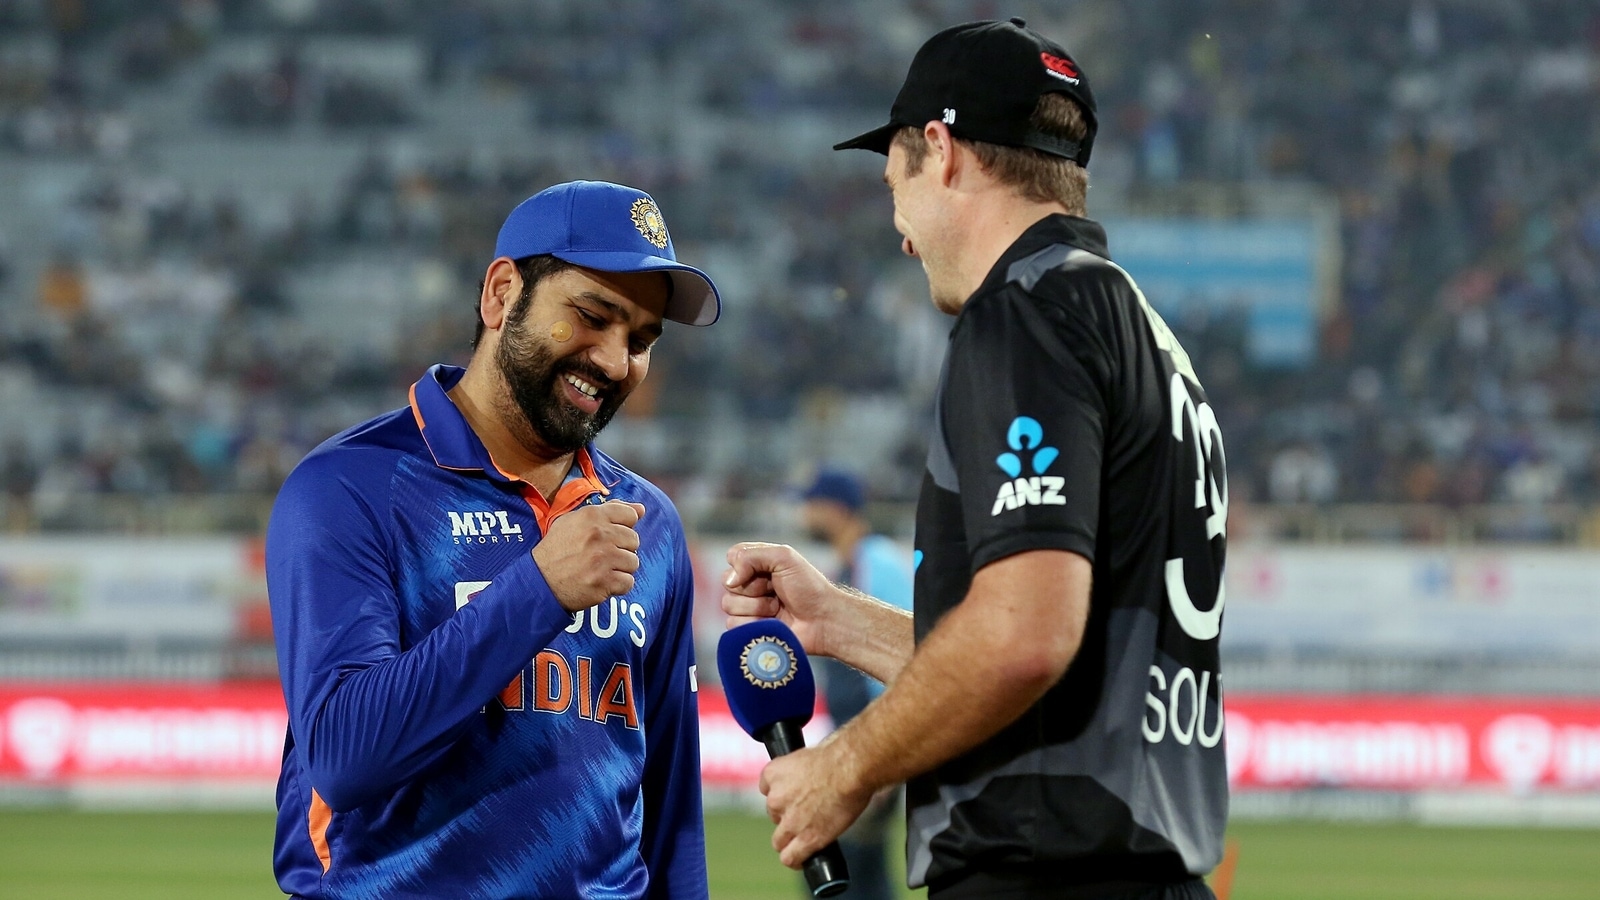 India vs New Zealand 3rd T20 Live Streaming When and Where to watch IND vs NZ 3rd T20I Live on TV and Online Cricket